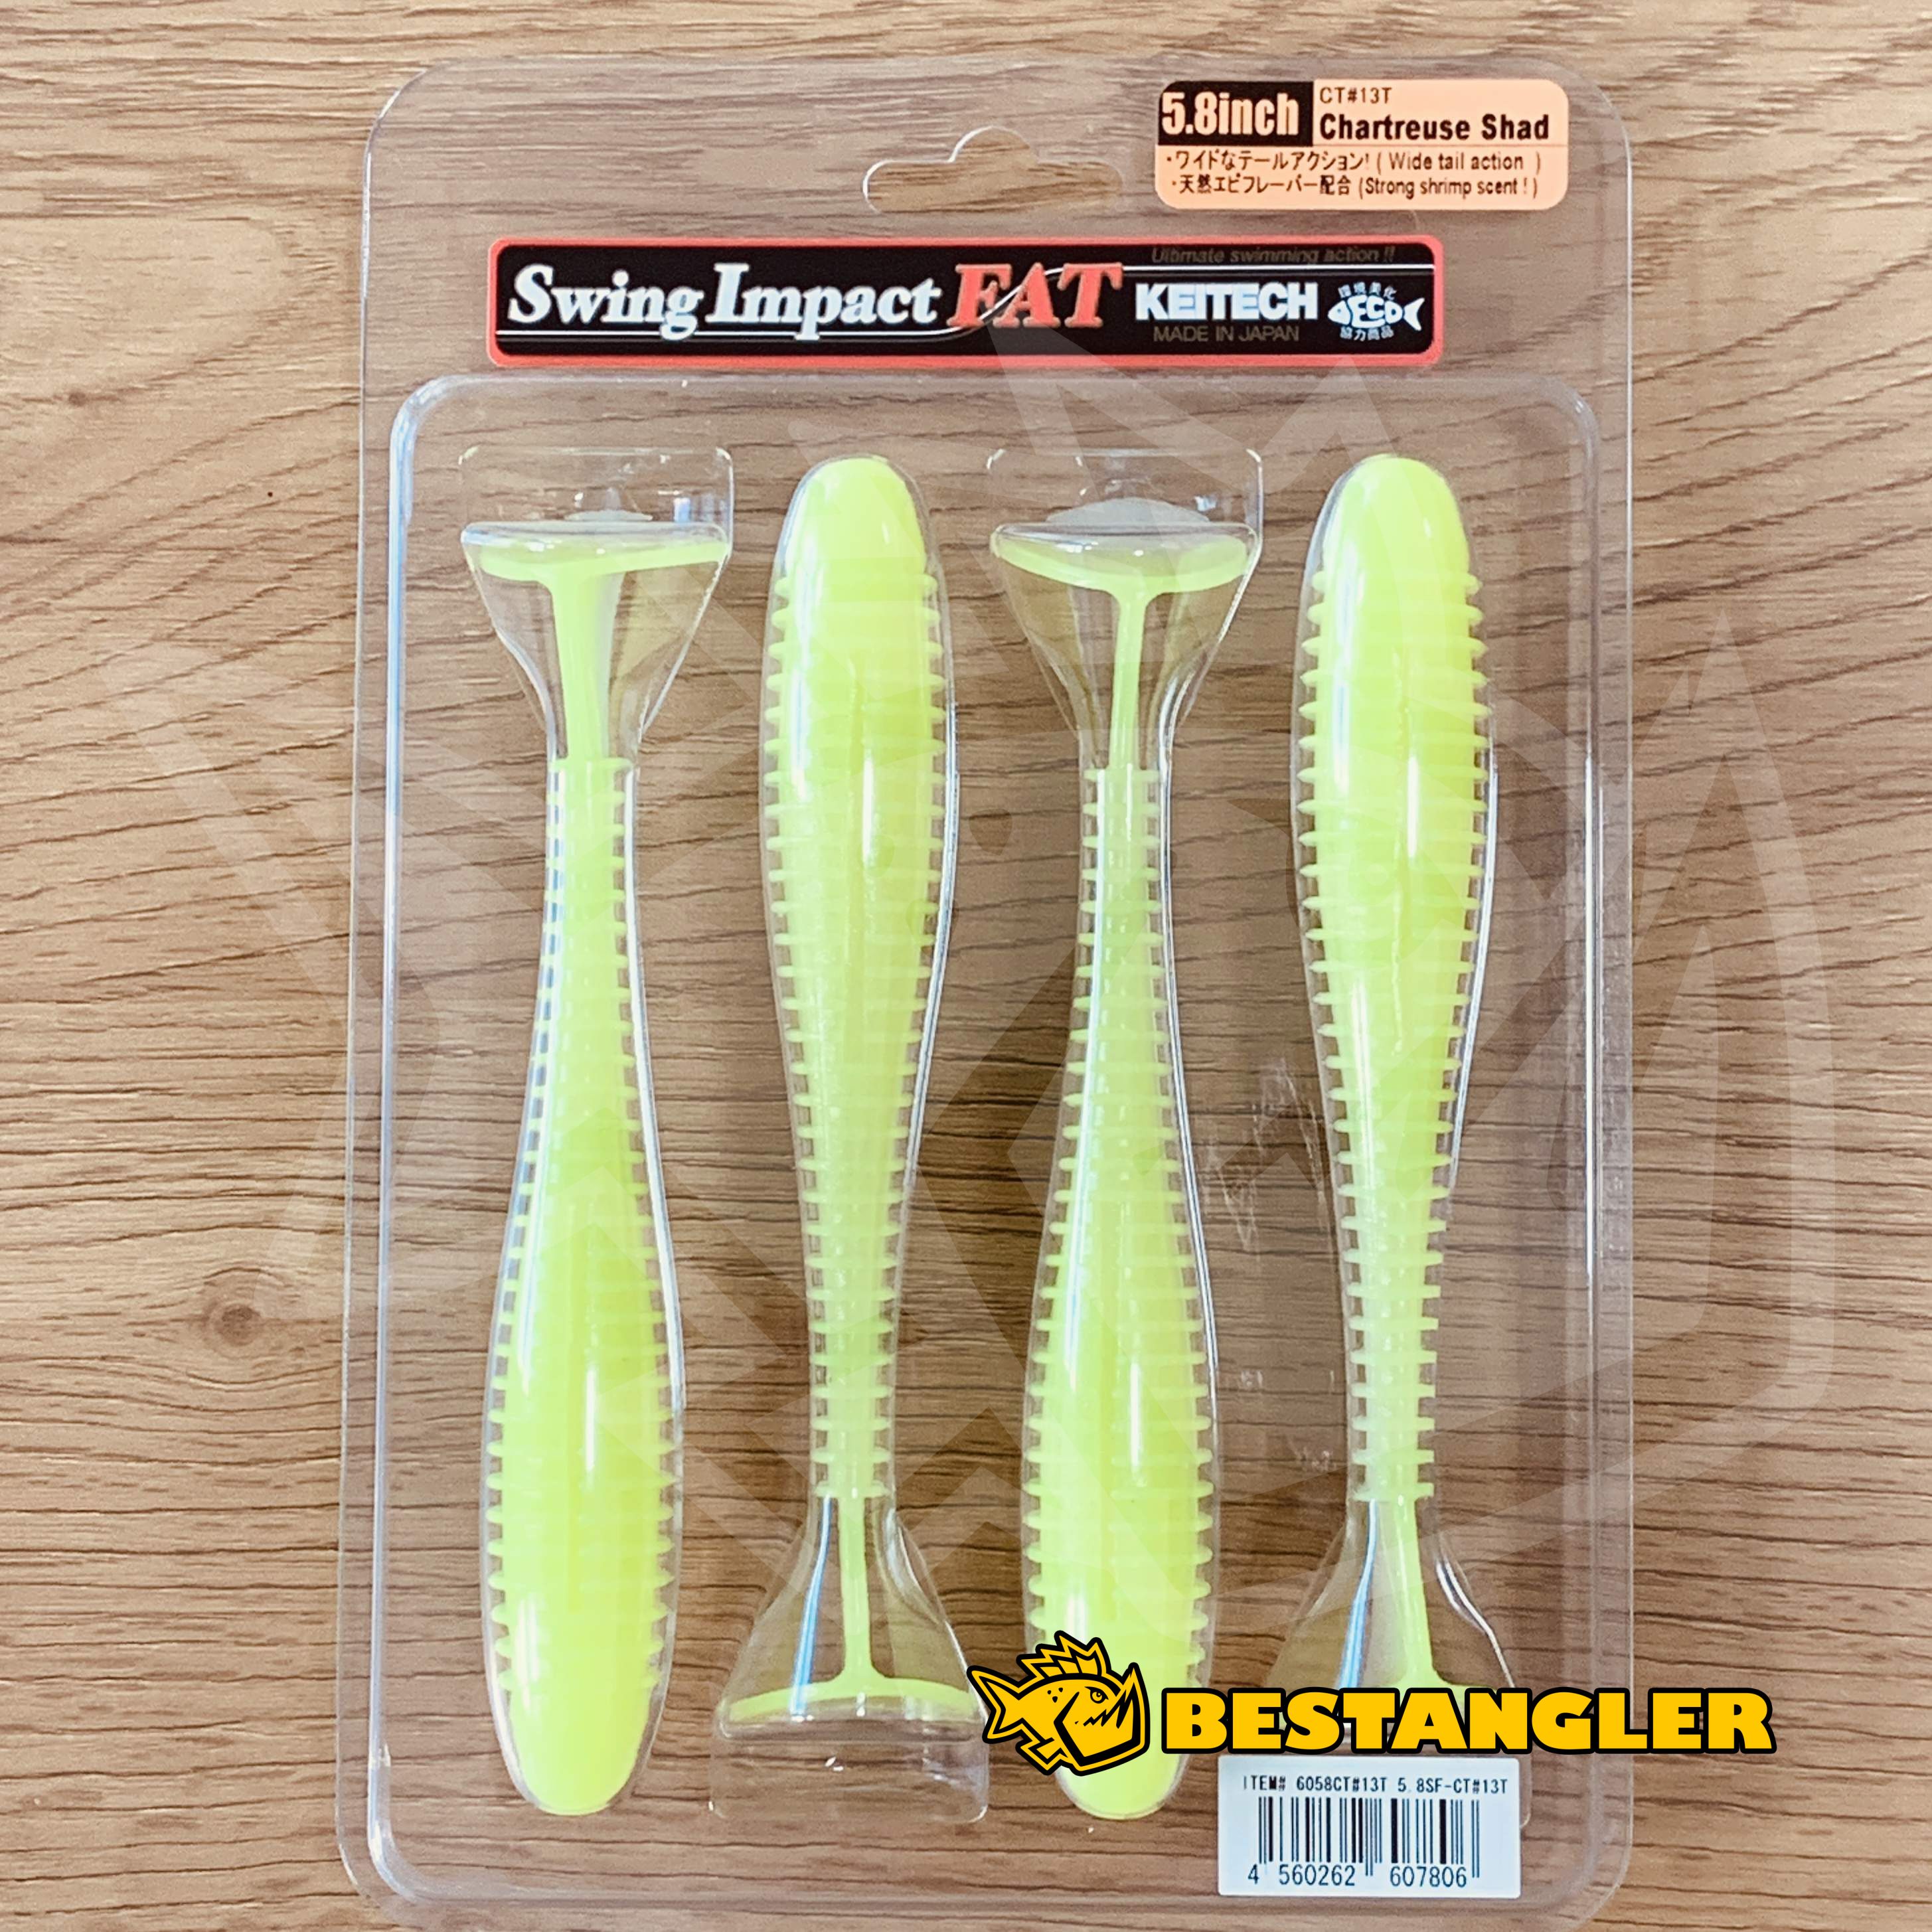 Keitech FAT Chartreuse Impact Shad Swing 5.8